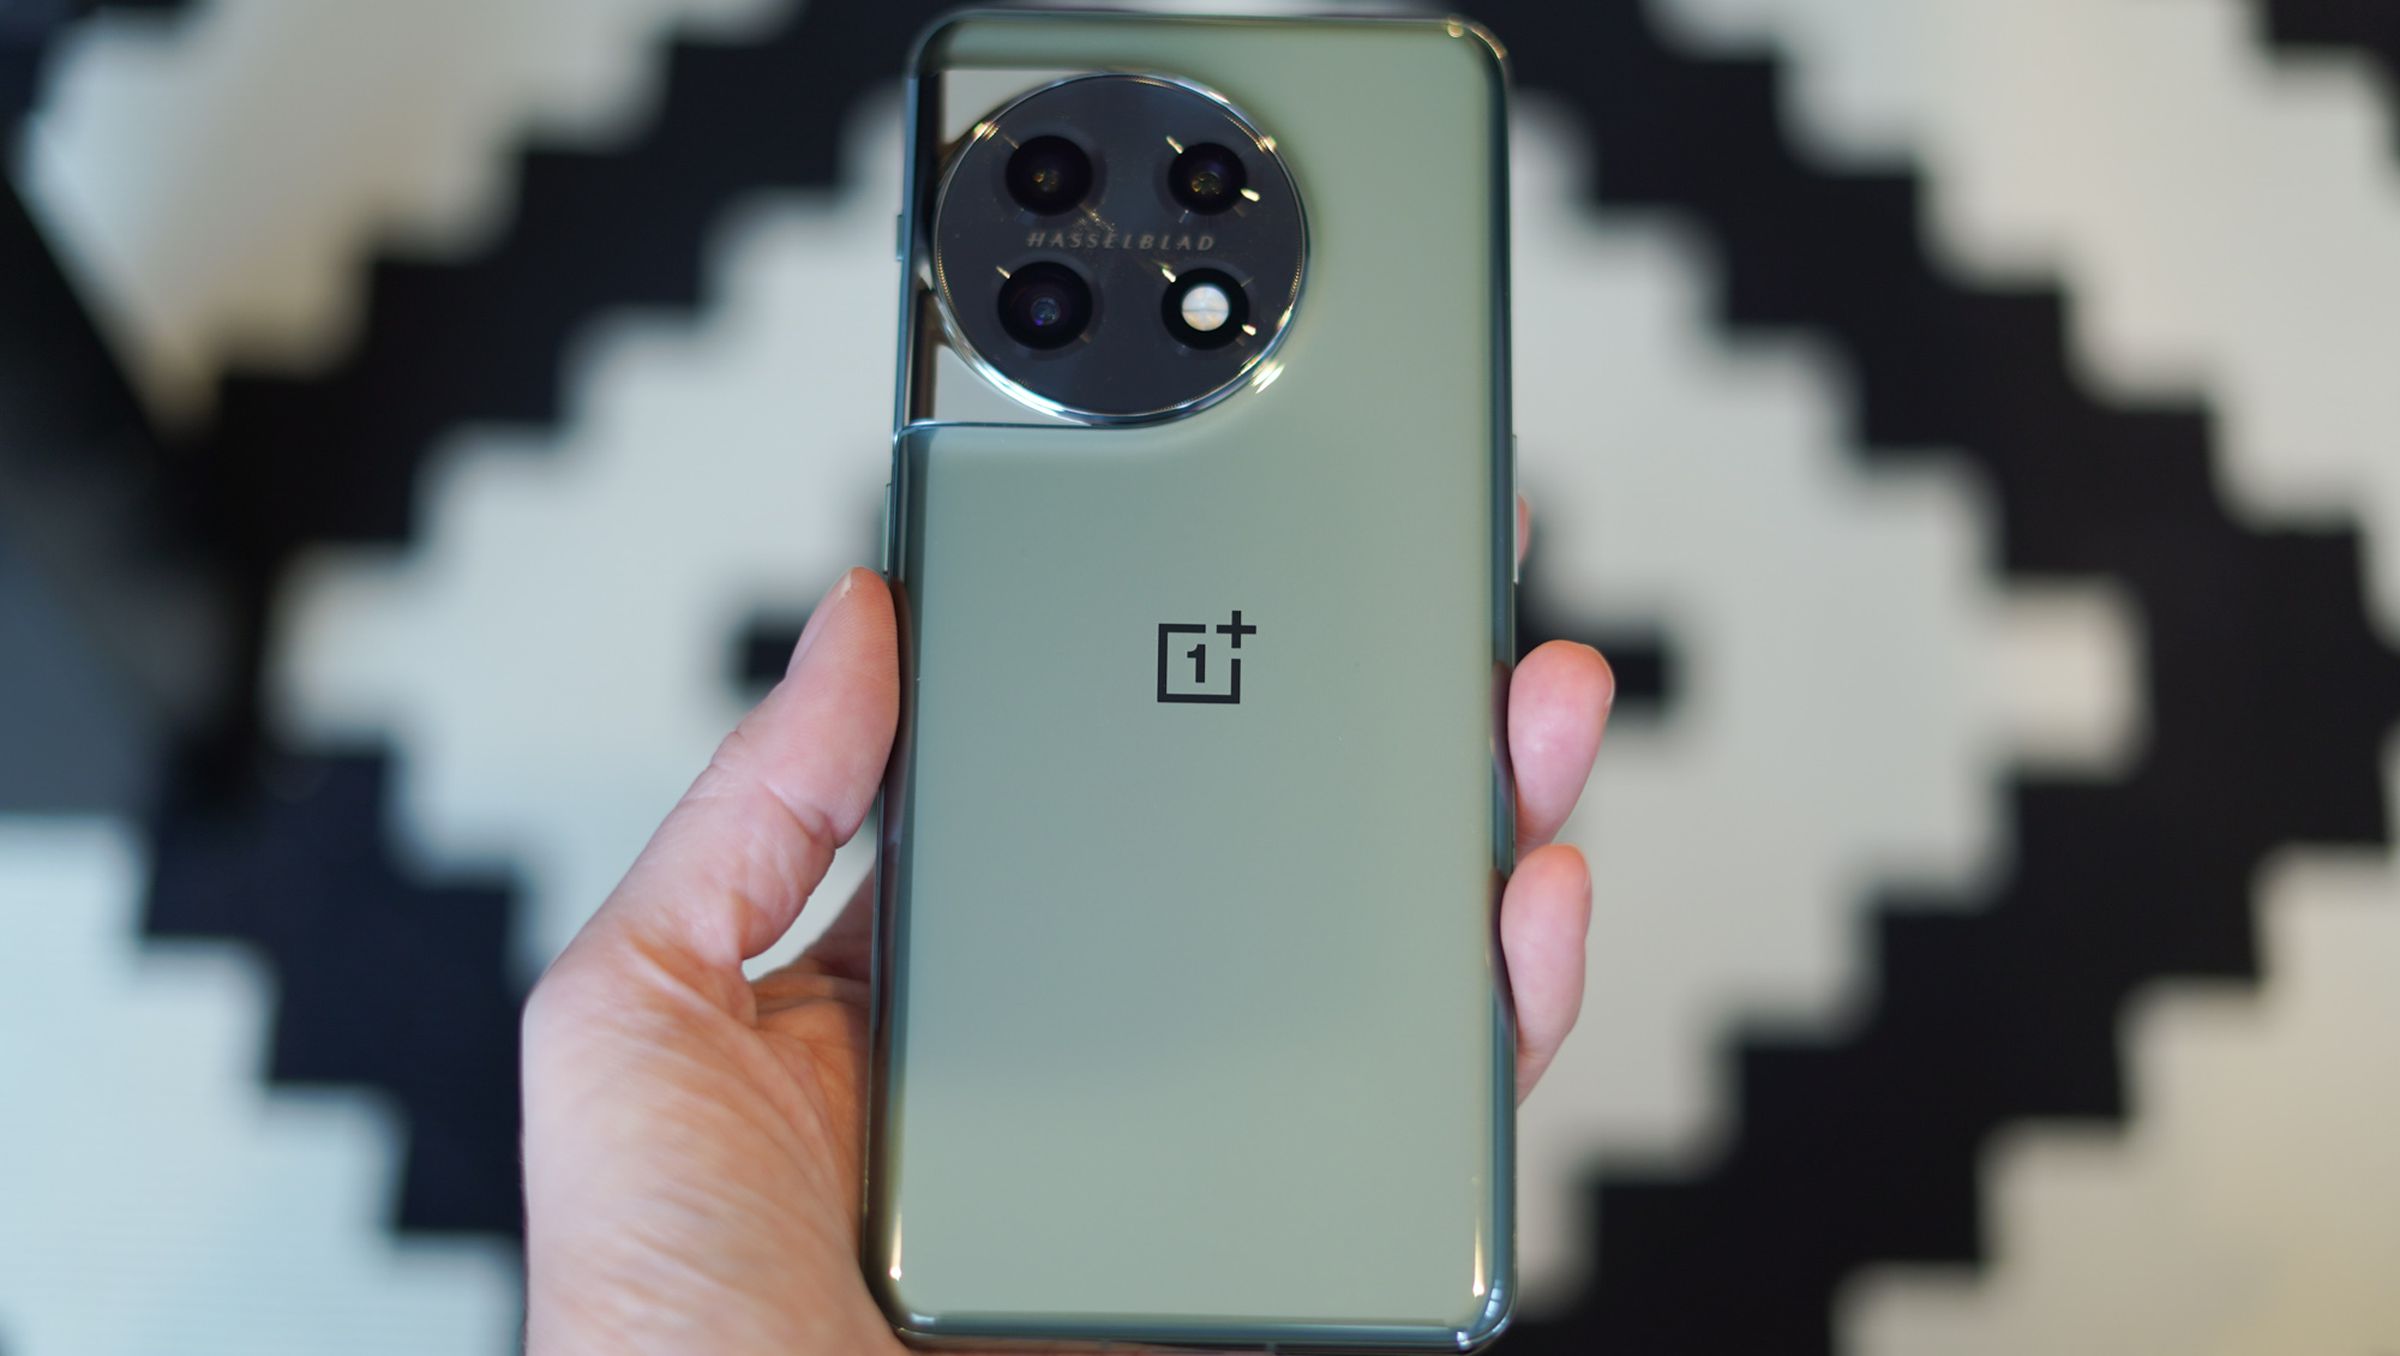 OnePlus 11 5G in-hand showing green color option and OnePlus logo with a black and white background.